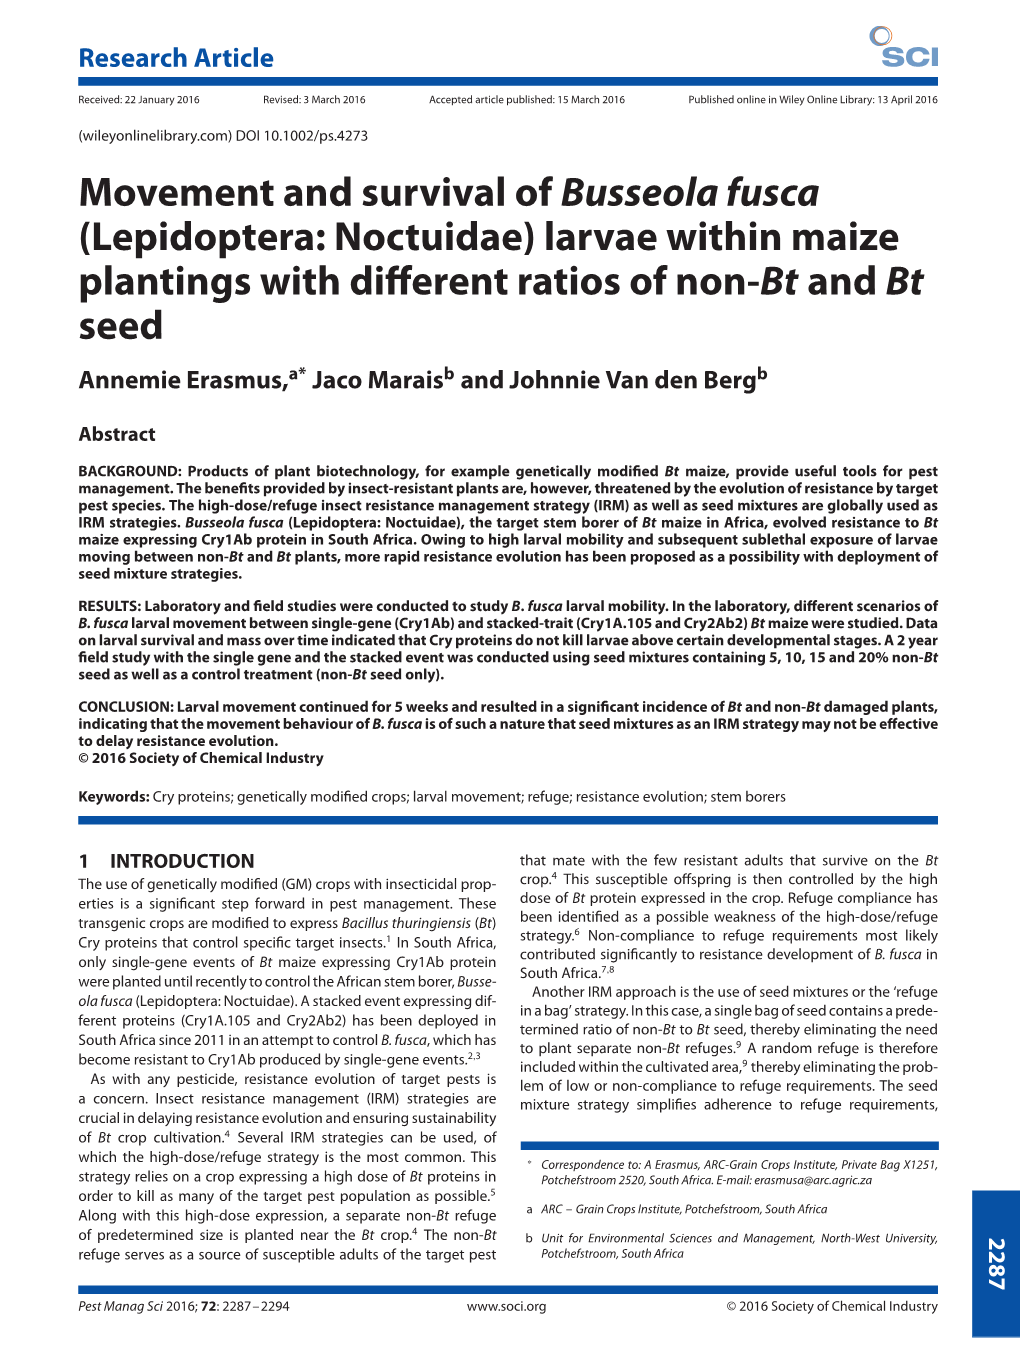 Movement and Survival of Busseola Fusca (Lepidoptera: Noctuidae) Larvae Within Maize Plantings with Different Ratios of Non-Bt A